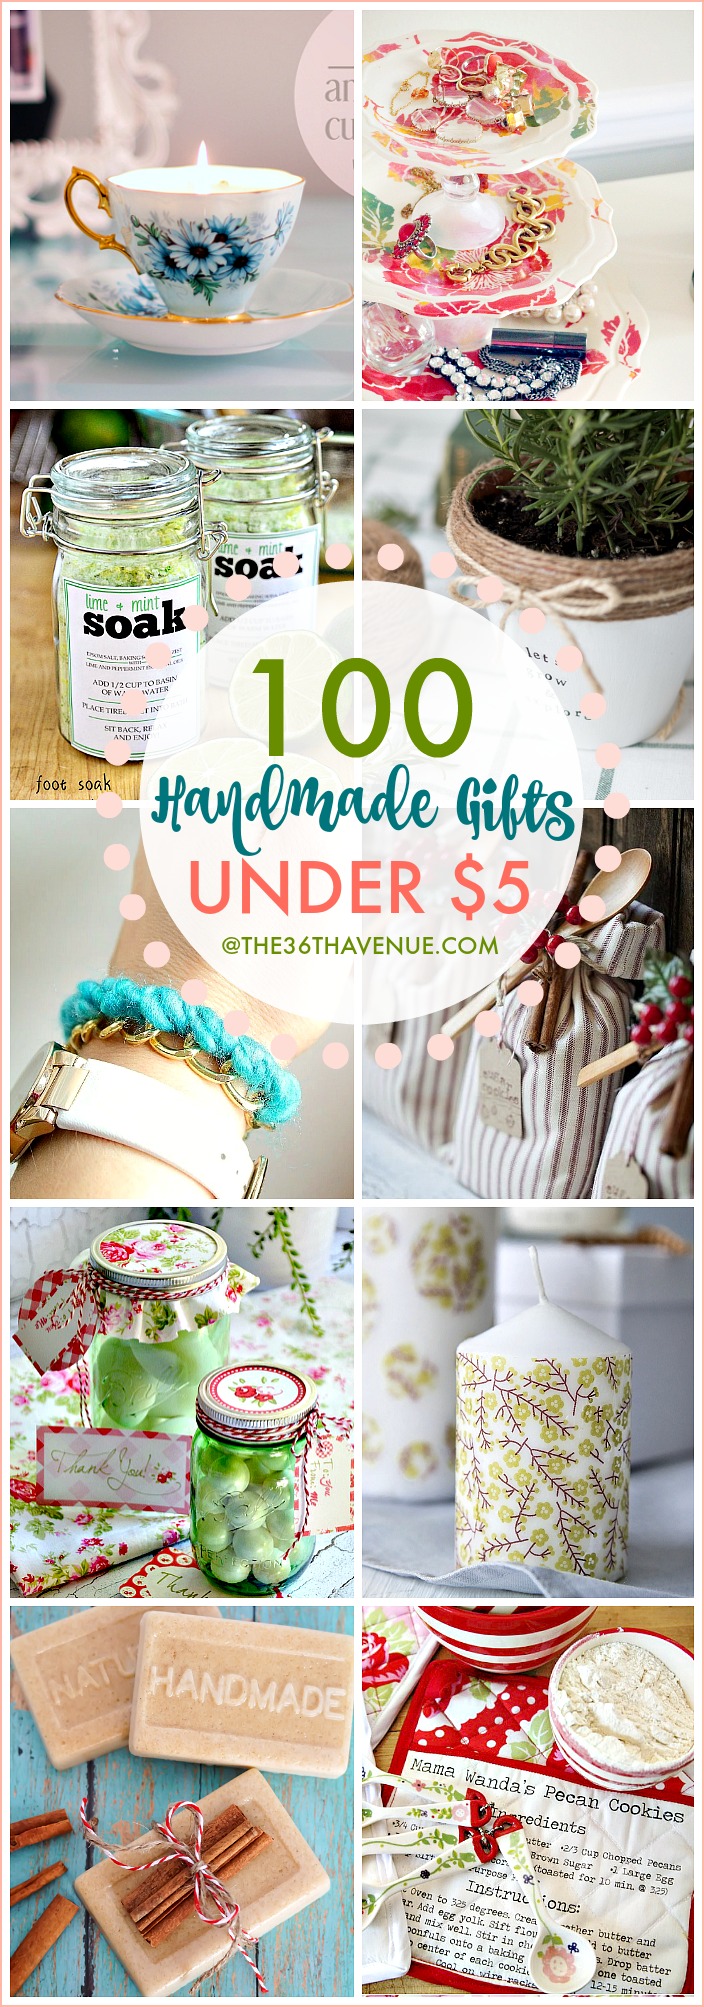 Handmade Gifts Under Five Dollars at the36thavenue.com